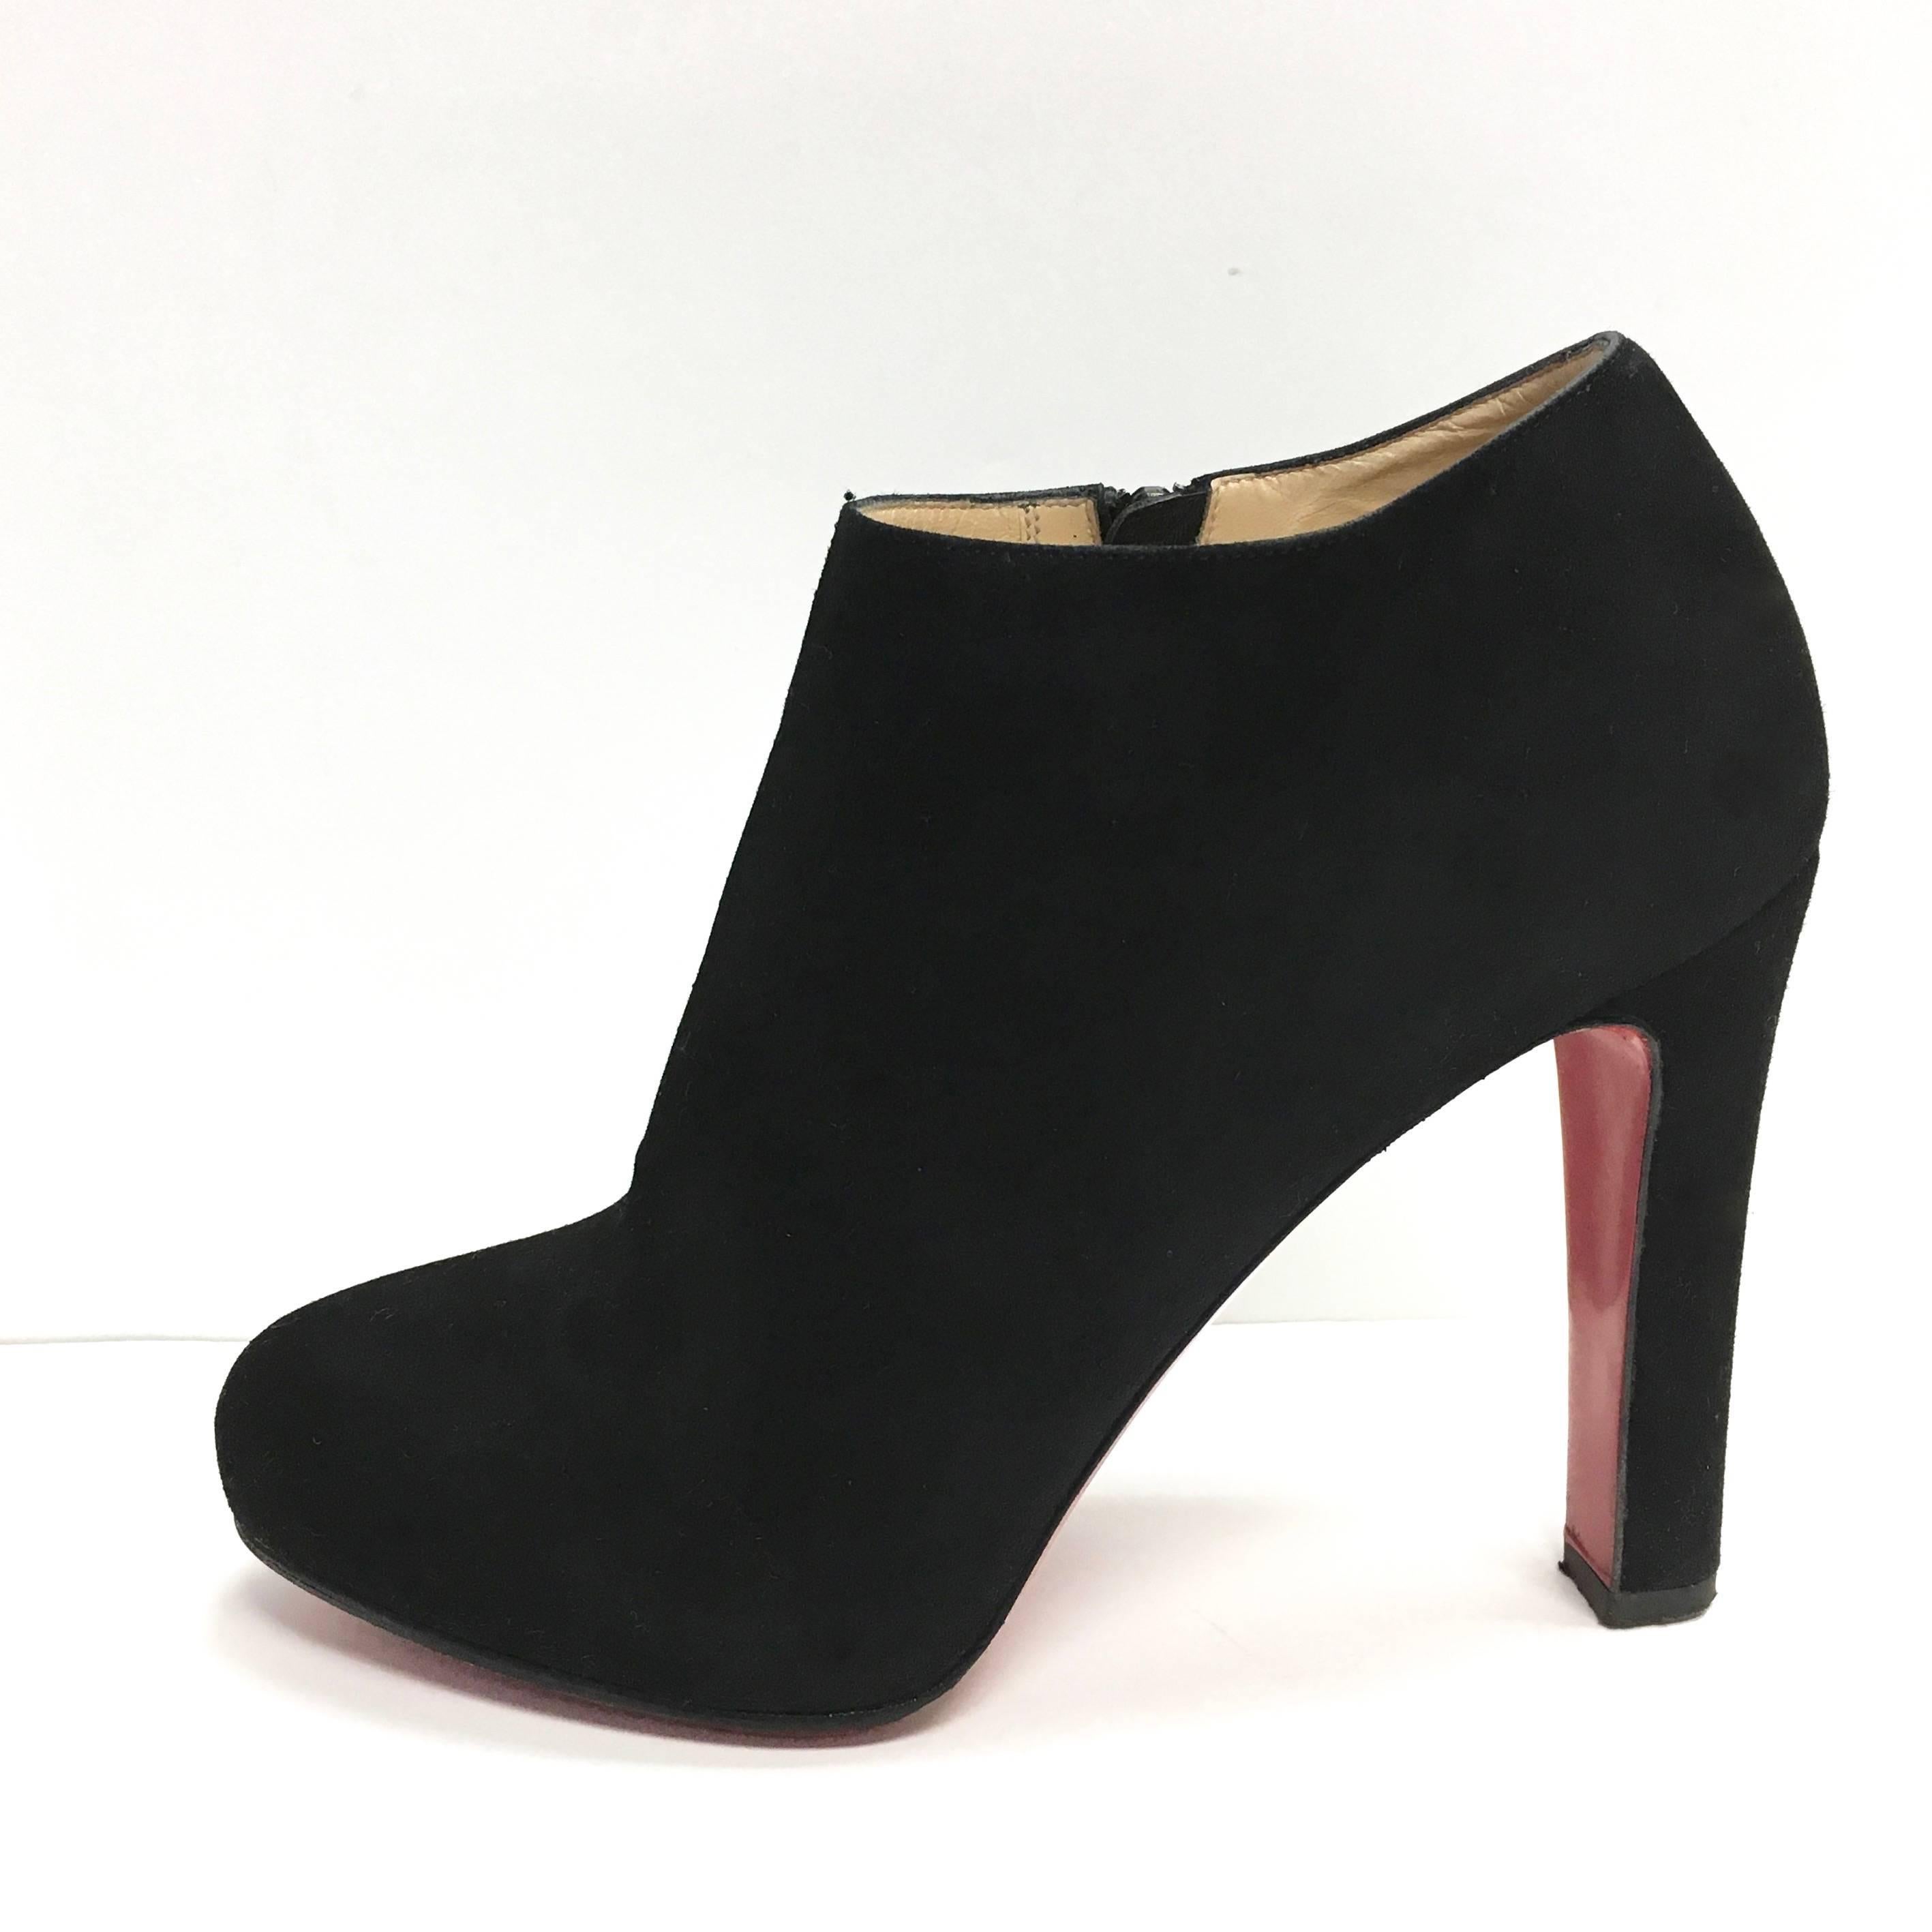 CHRISTIAN LOUBOUTIN Vicky Booty 120 Black Suede Red Bottom Ankle Boots
Size 37.5 ITA / 7.5 US
Heel measures approximately 4.5 inches with a 0.5 inch concealed platform.
Almond toe, signature red leather sole. Zip fastening at inner